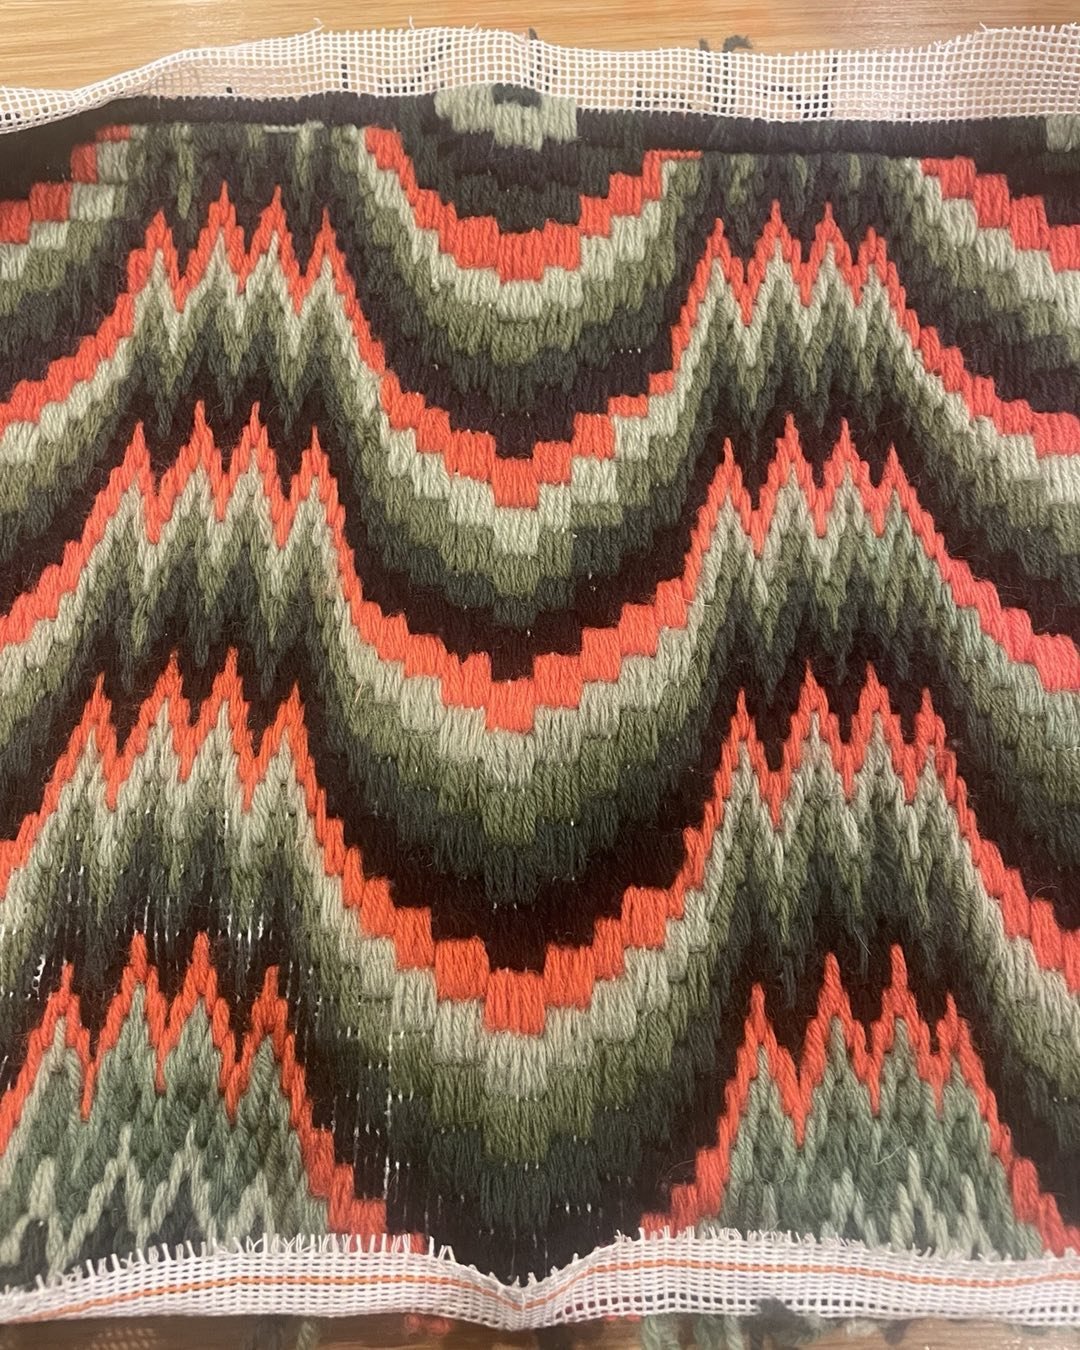 First Bargello DONE. Based the pattern on a caftan #mariacallas wore on the Christina #methodBargello #DivaTheBook and the stitching stops me checking Amazon